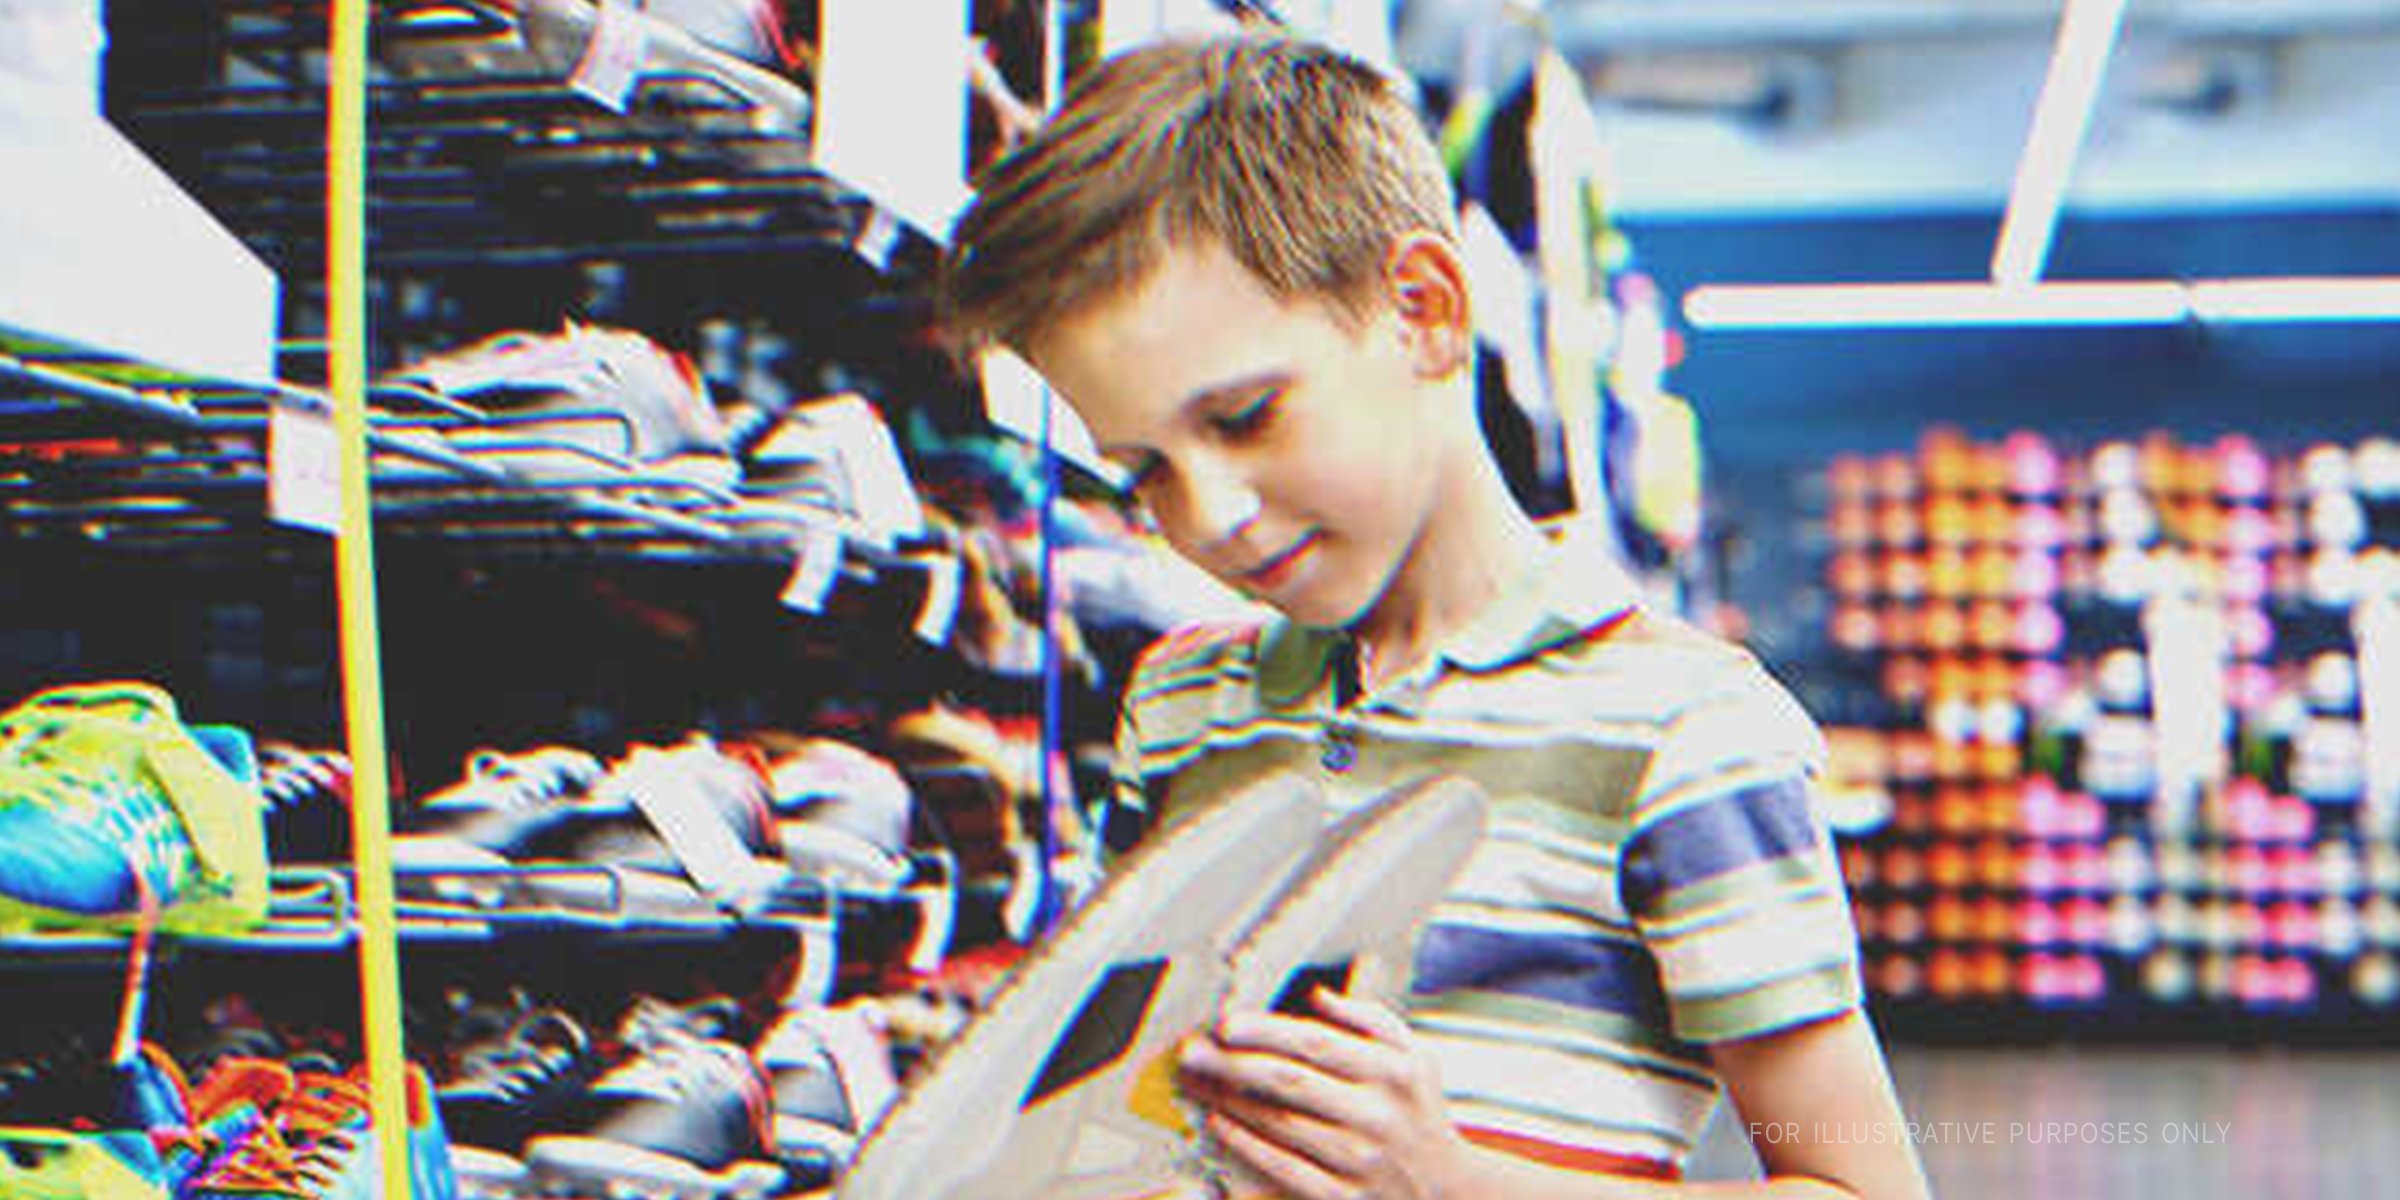 A boy looking at a pair of shoes | Source: Shutterstock